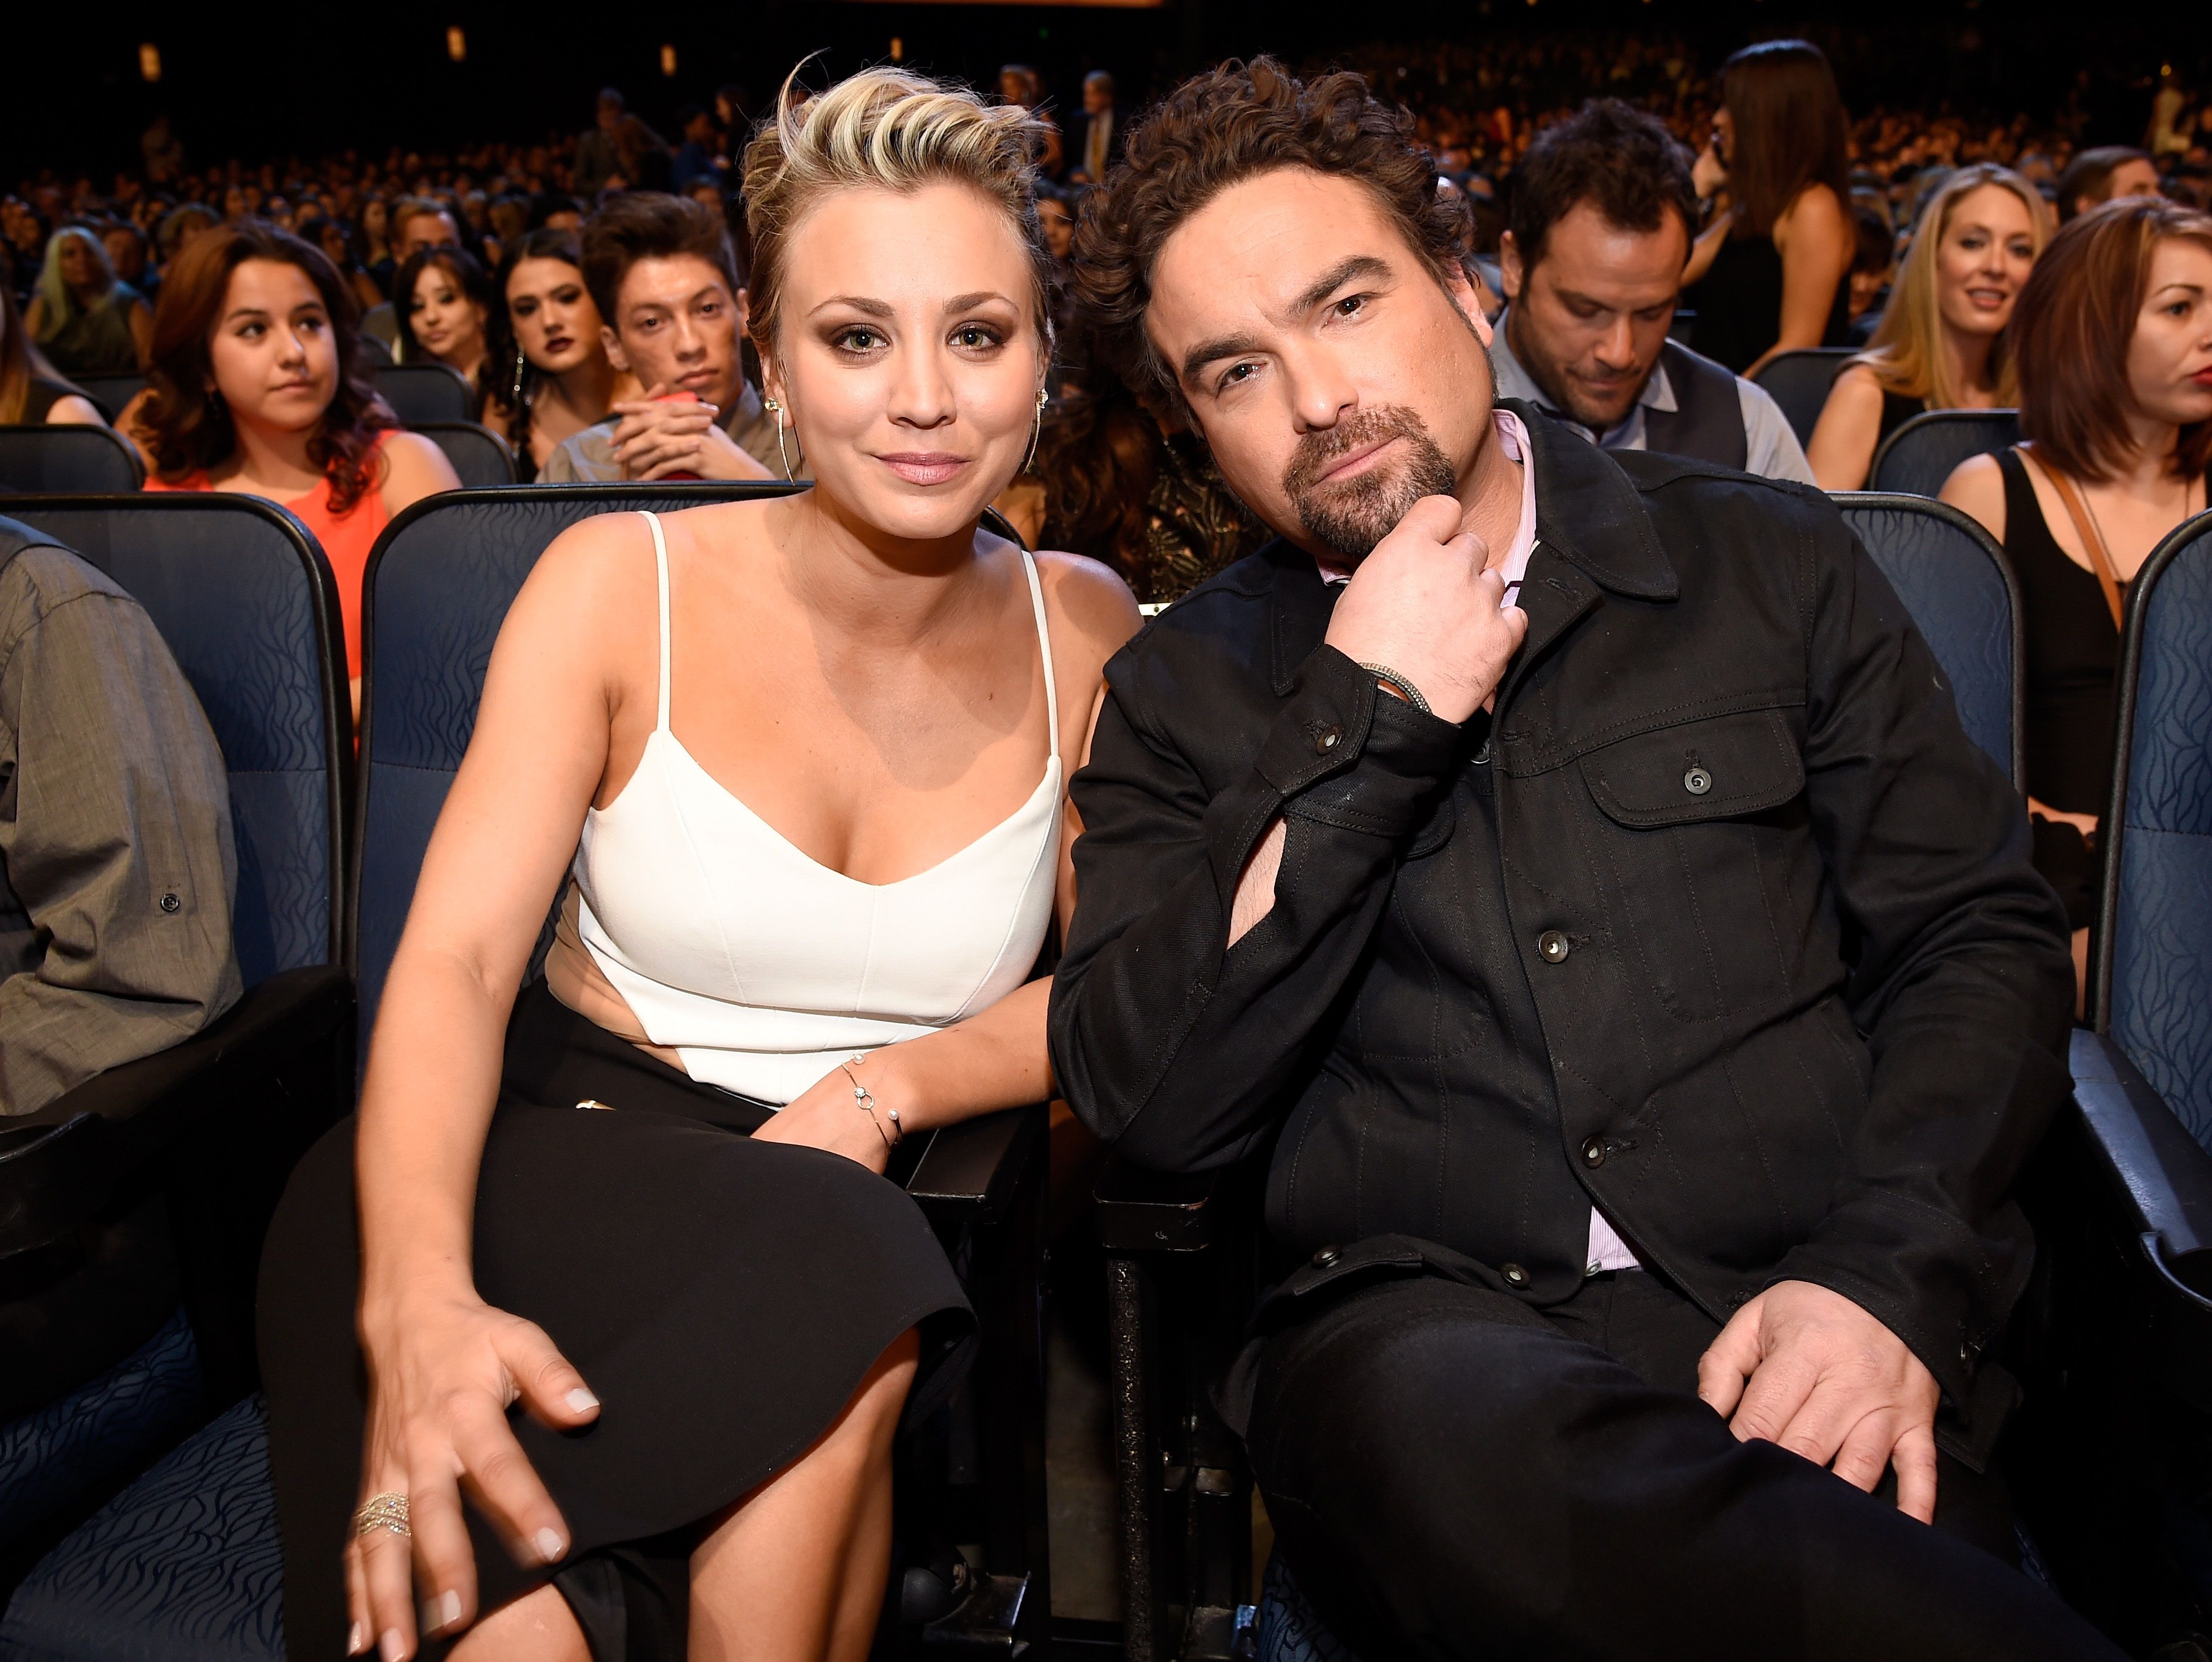 are-kaley-cuoco-johnny-galecki-back-together-following-her-divorce-cuoco-galecki-657777